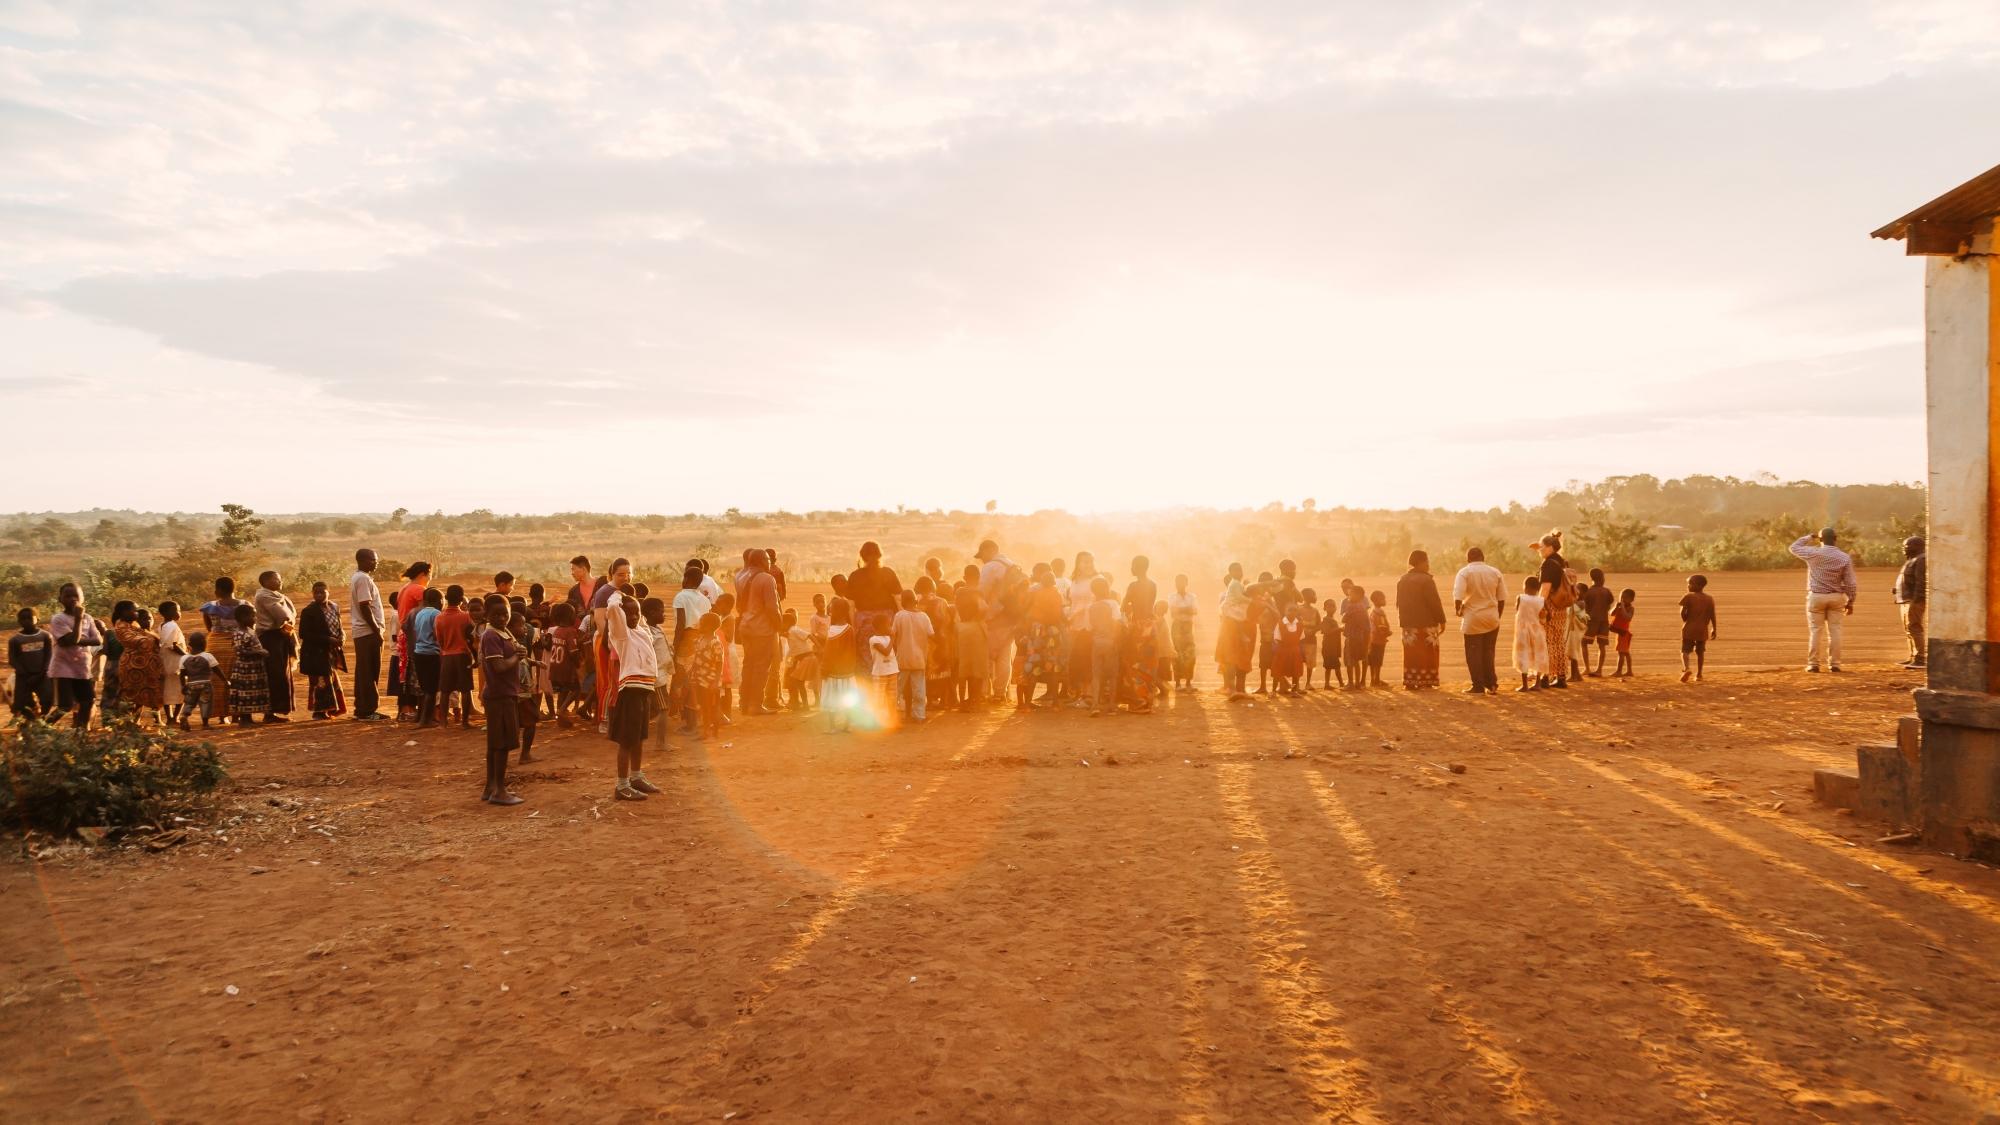 Adults and children stand in front of sun that is setting on horizon and casting a golden light over the foreground